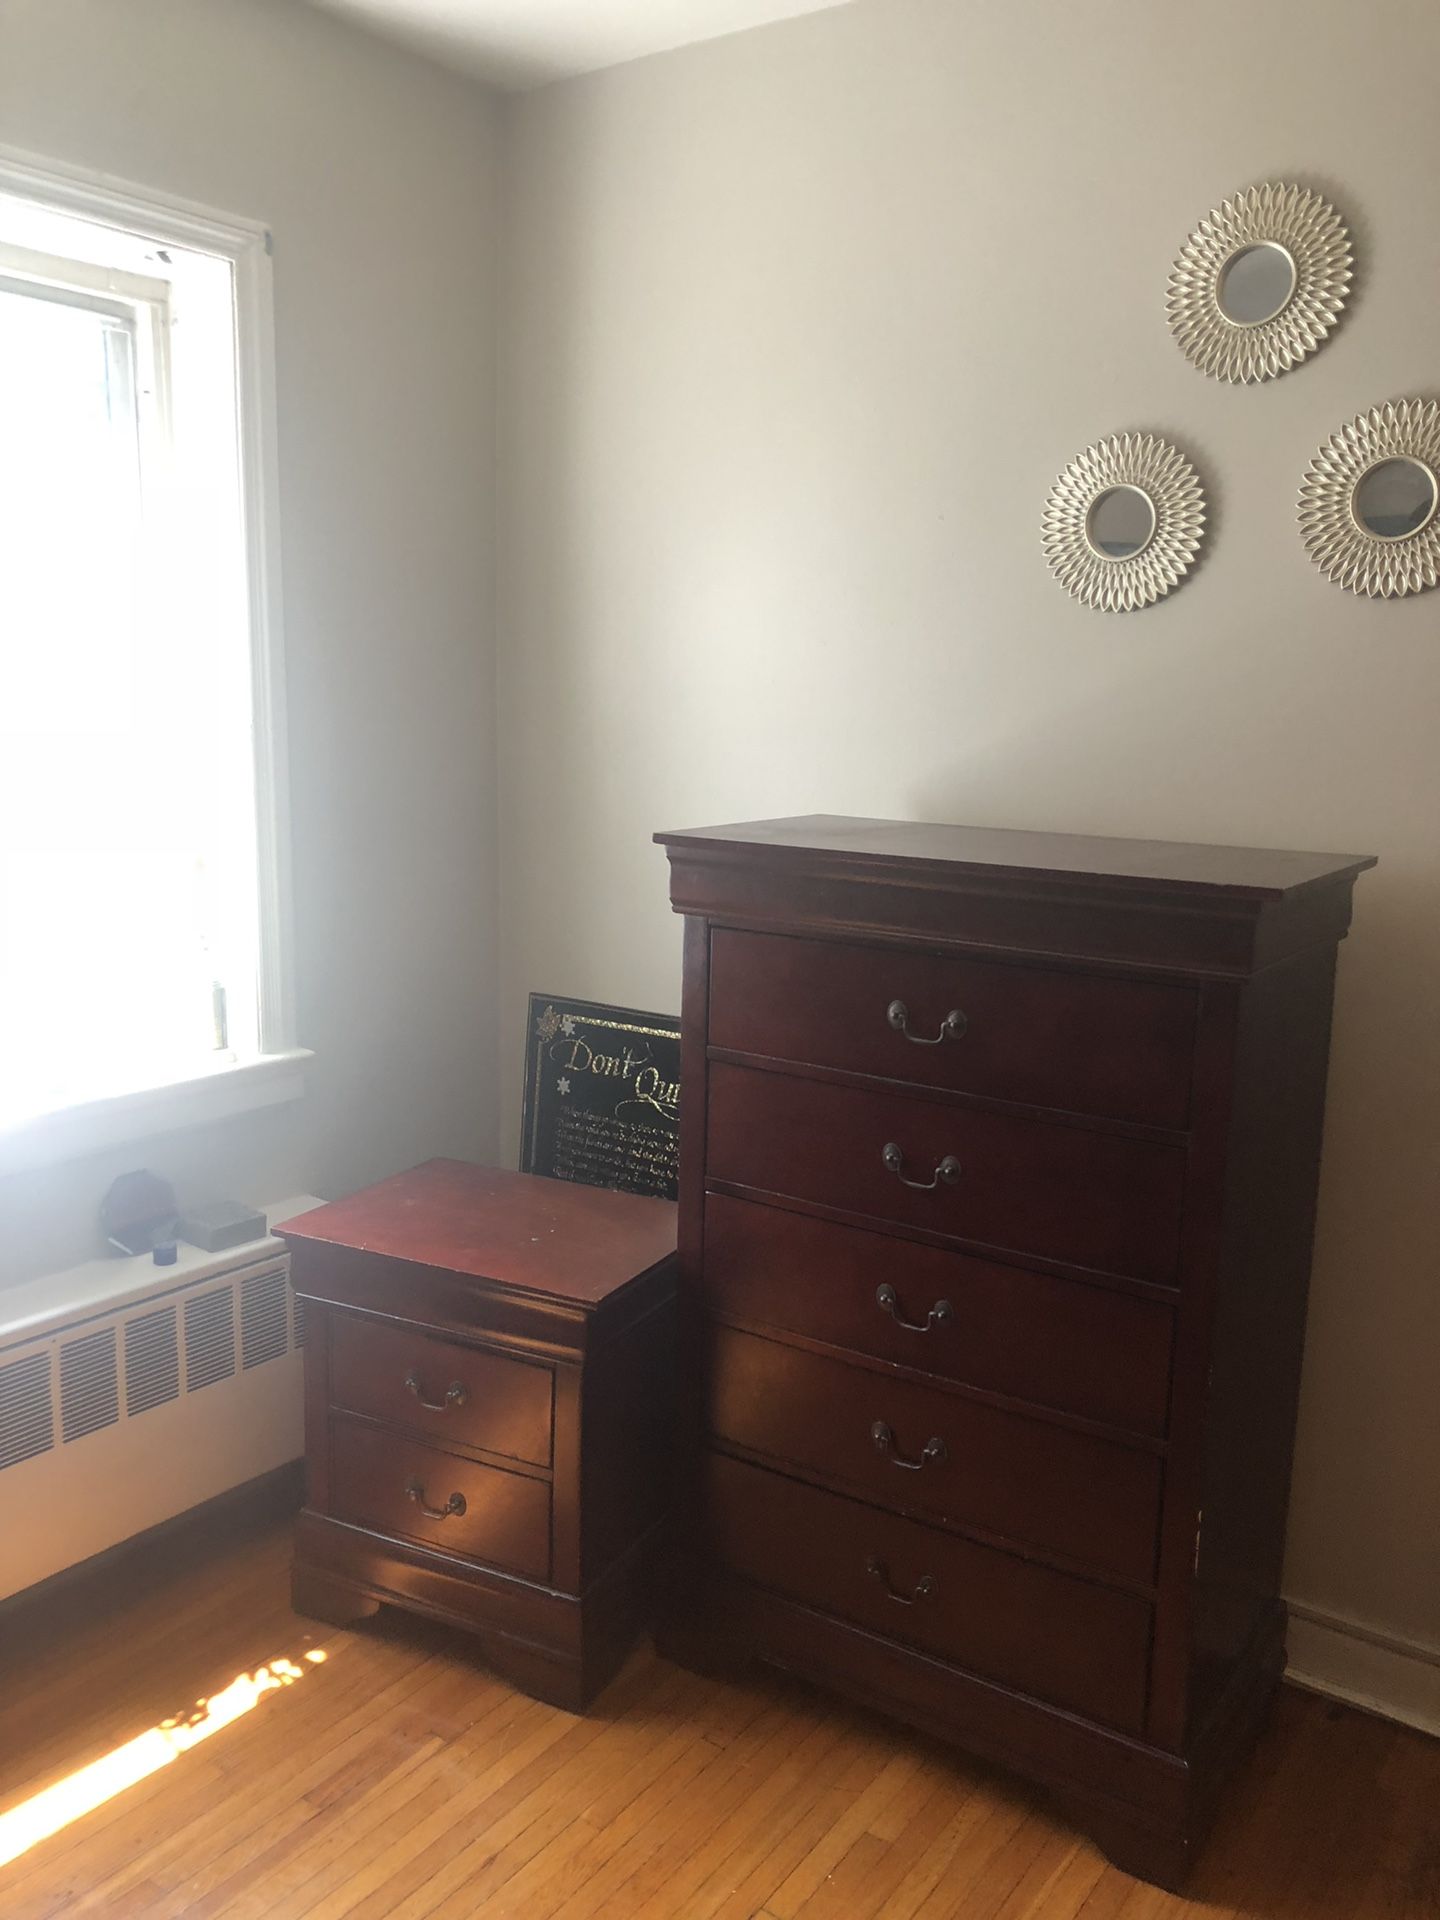 wooden mahogany 2 dresser and night stand for $200 also sold seperate